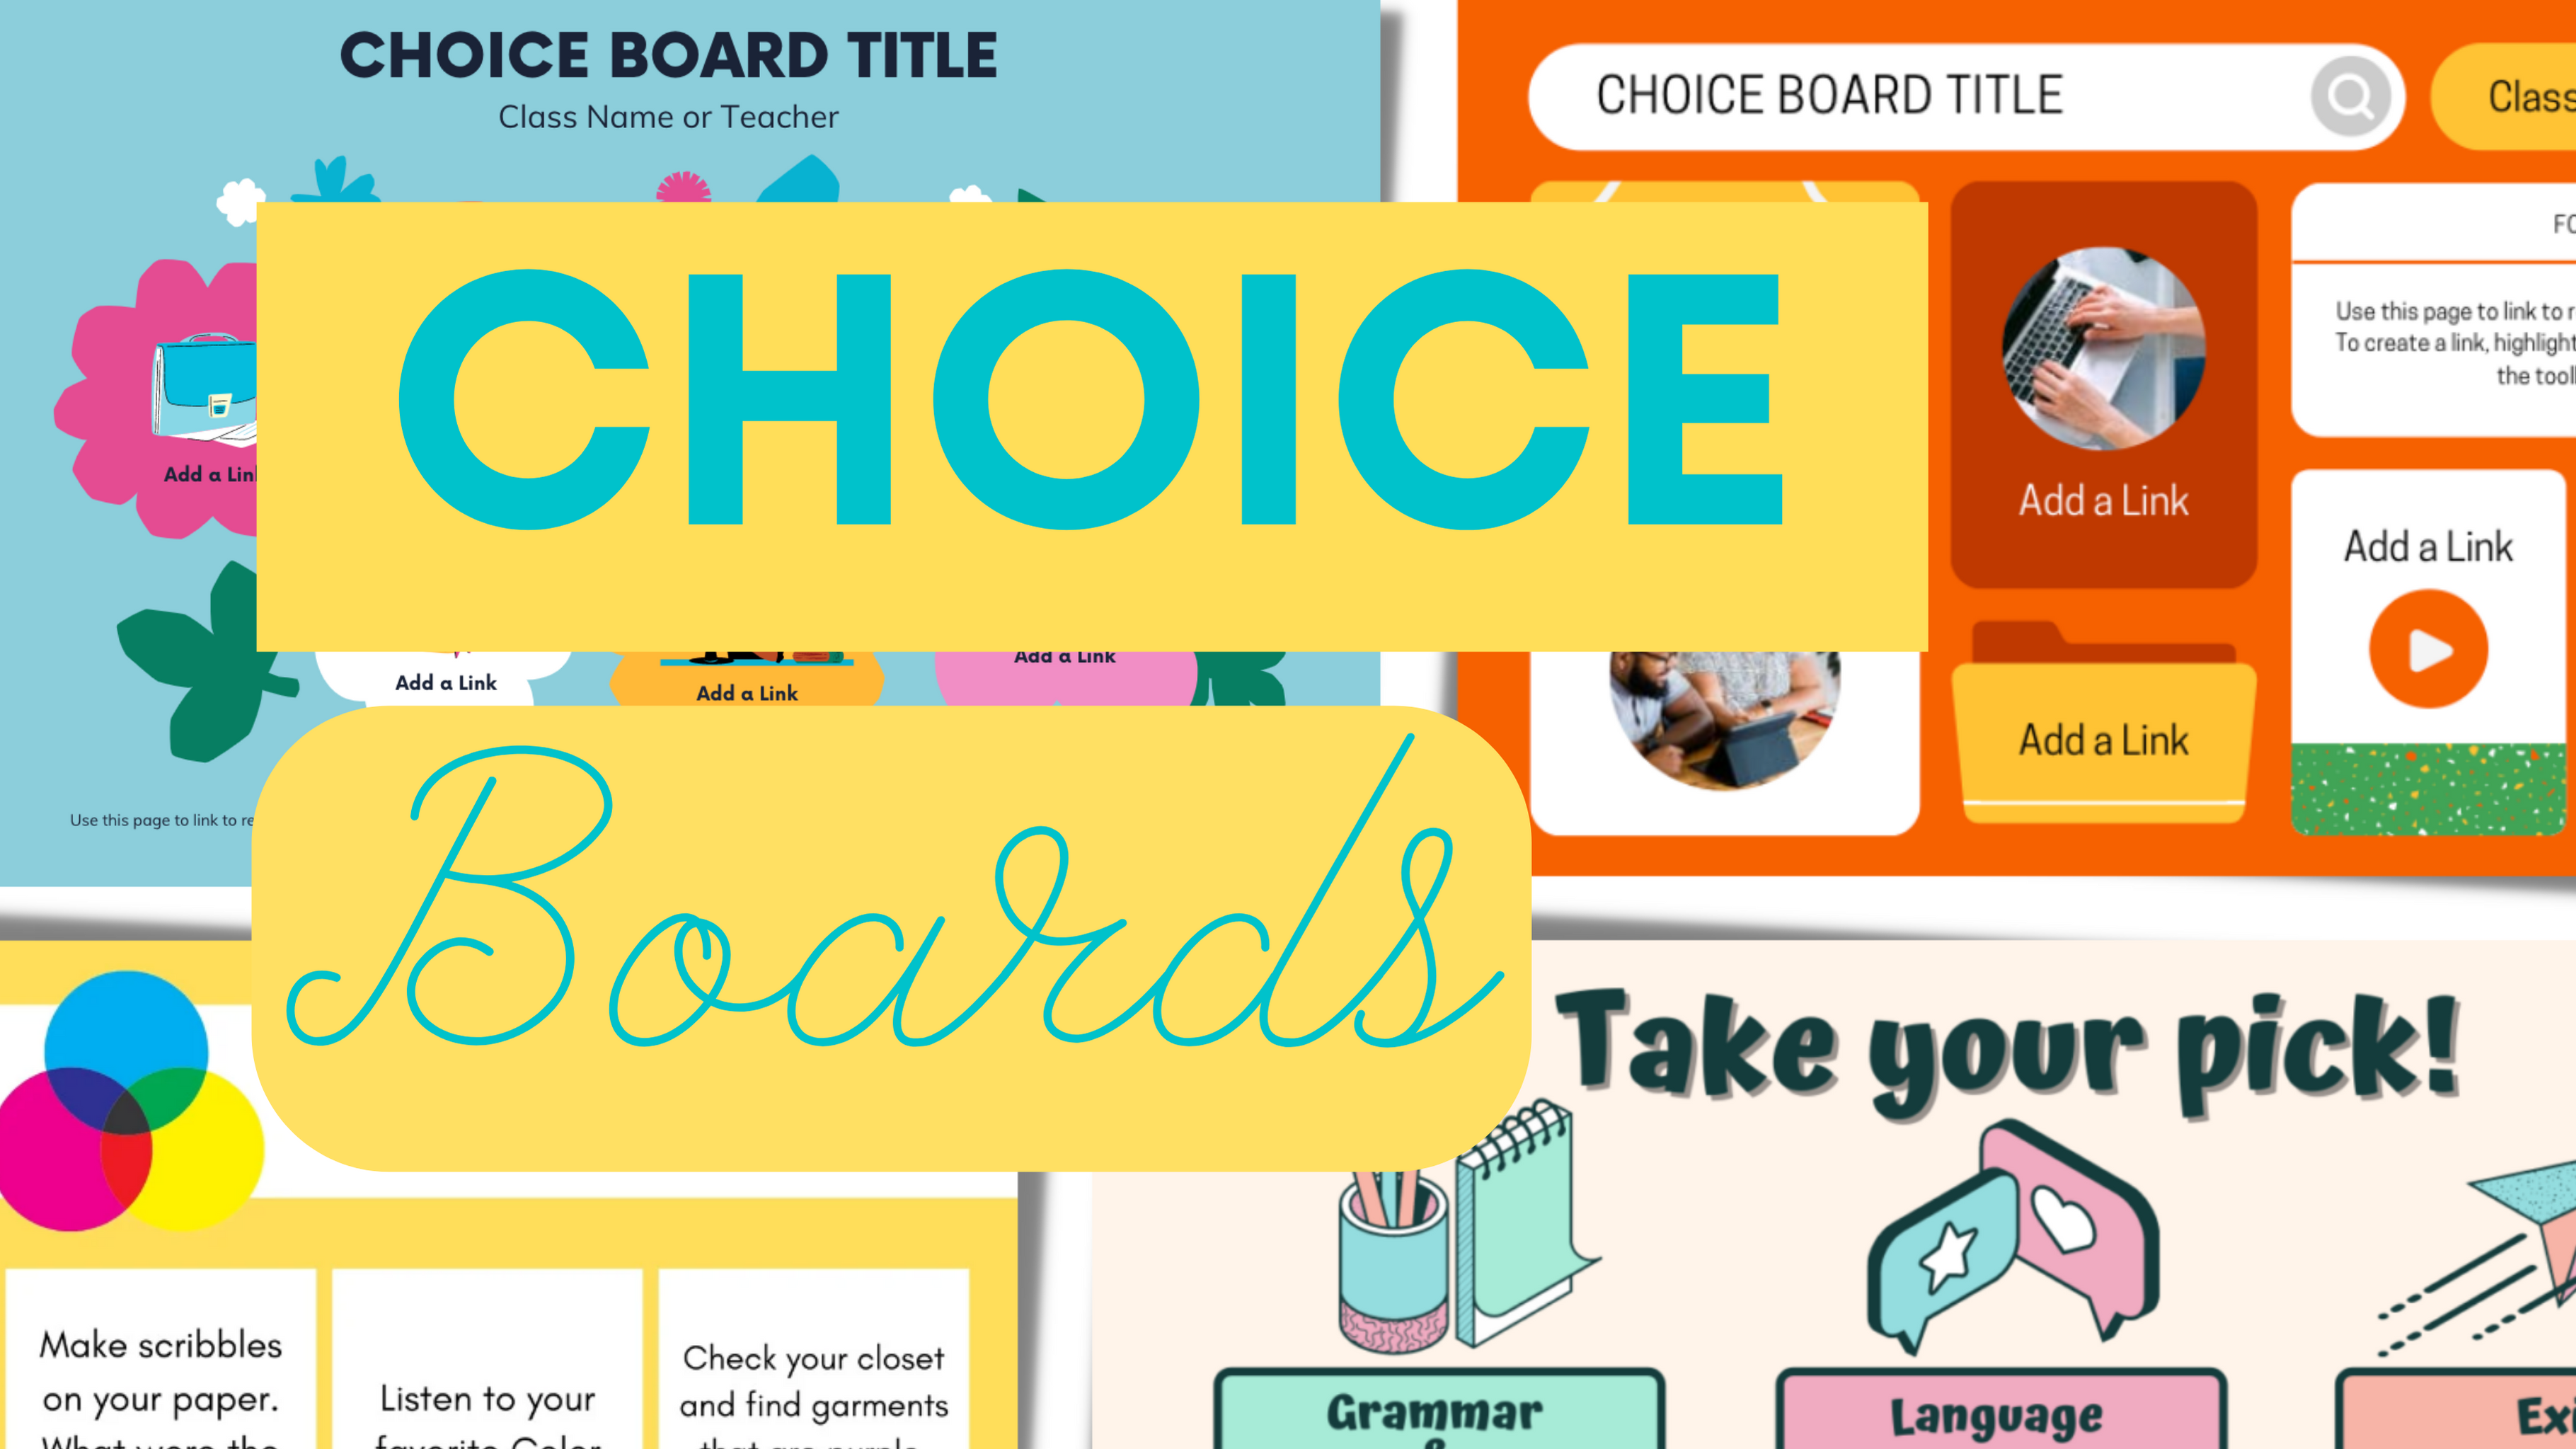 a-collection-of-choice-board-examples-and-templates-technotes-blog